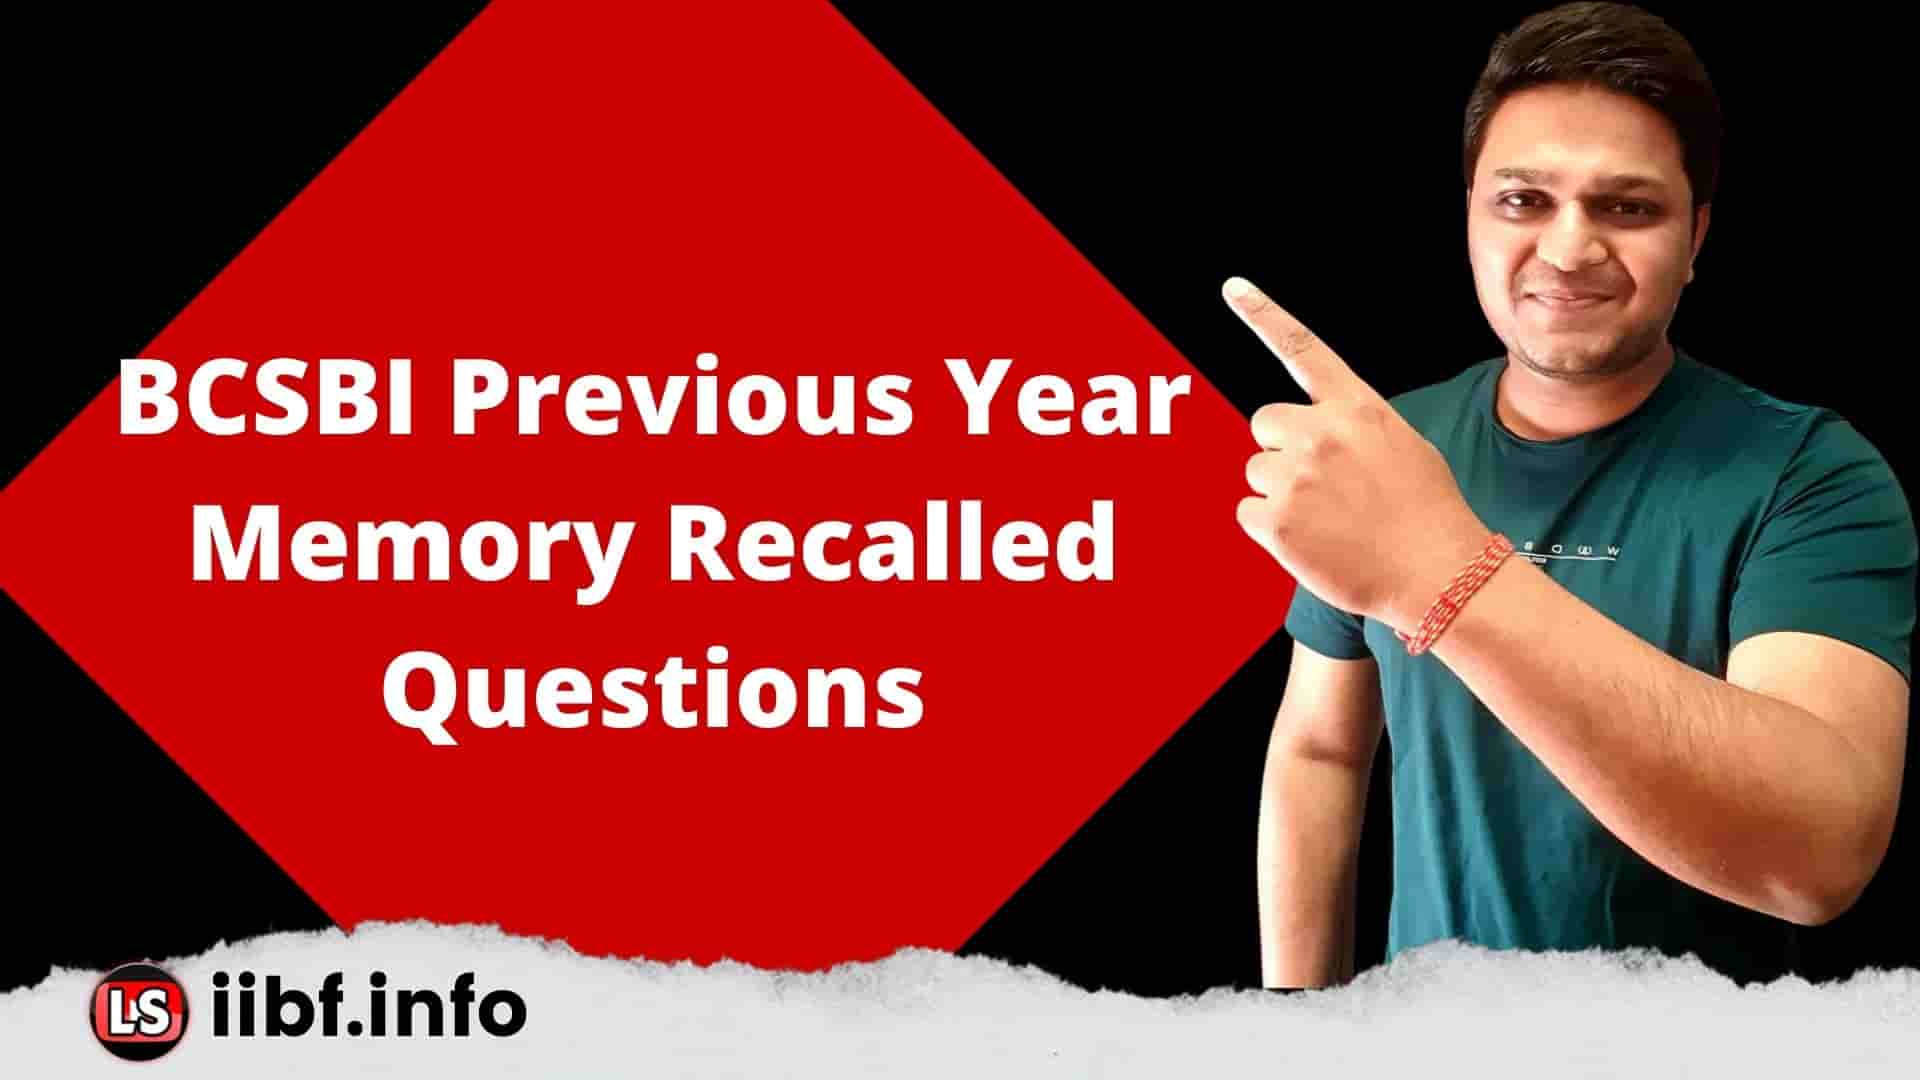 BCSBI Previous Year Memory Recalled Questions